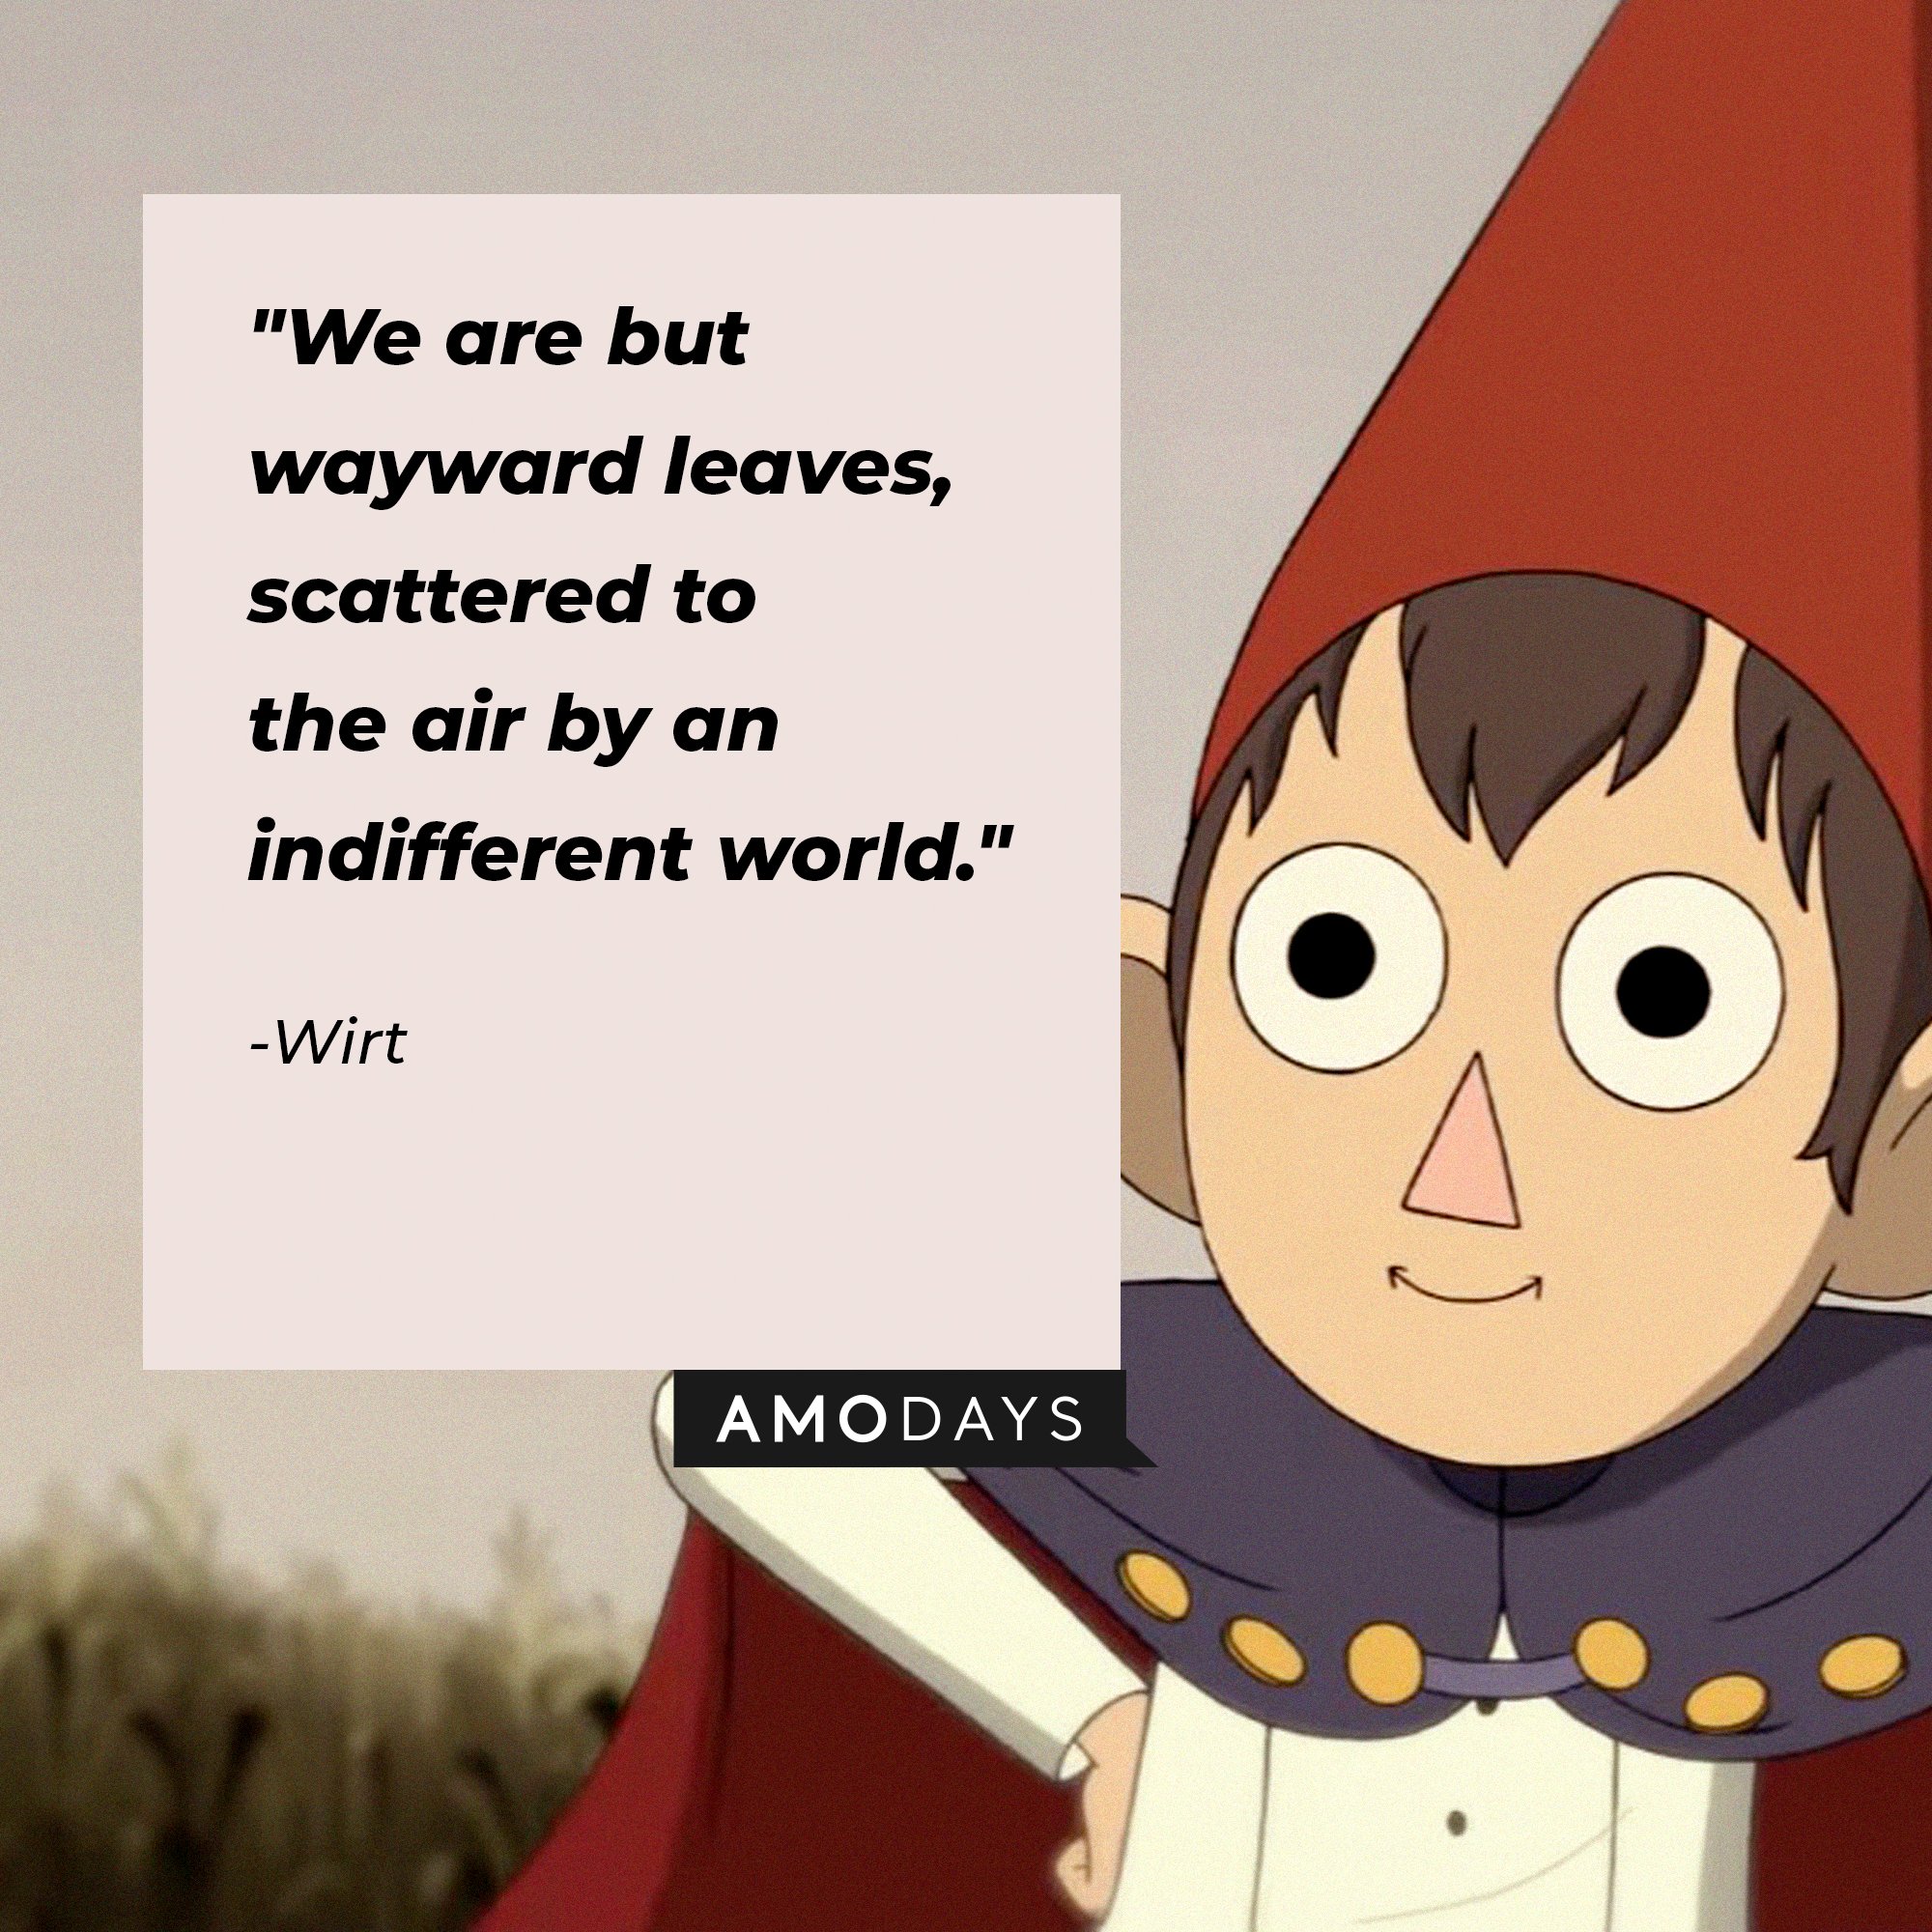  Wirt’s quote: "We are but wayward leaves, scattered to the air by an indifferent world." | Image: AmoDays